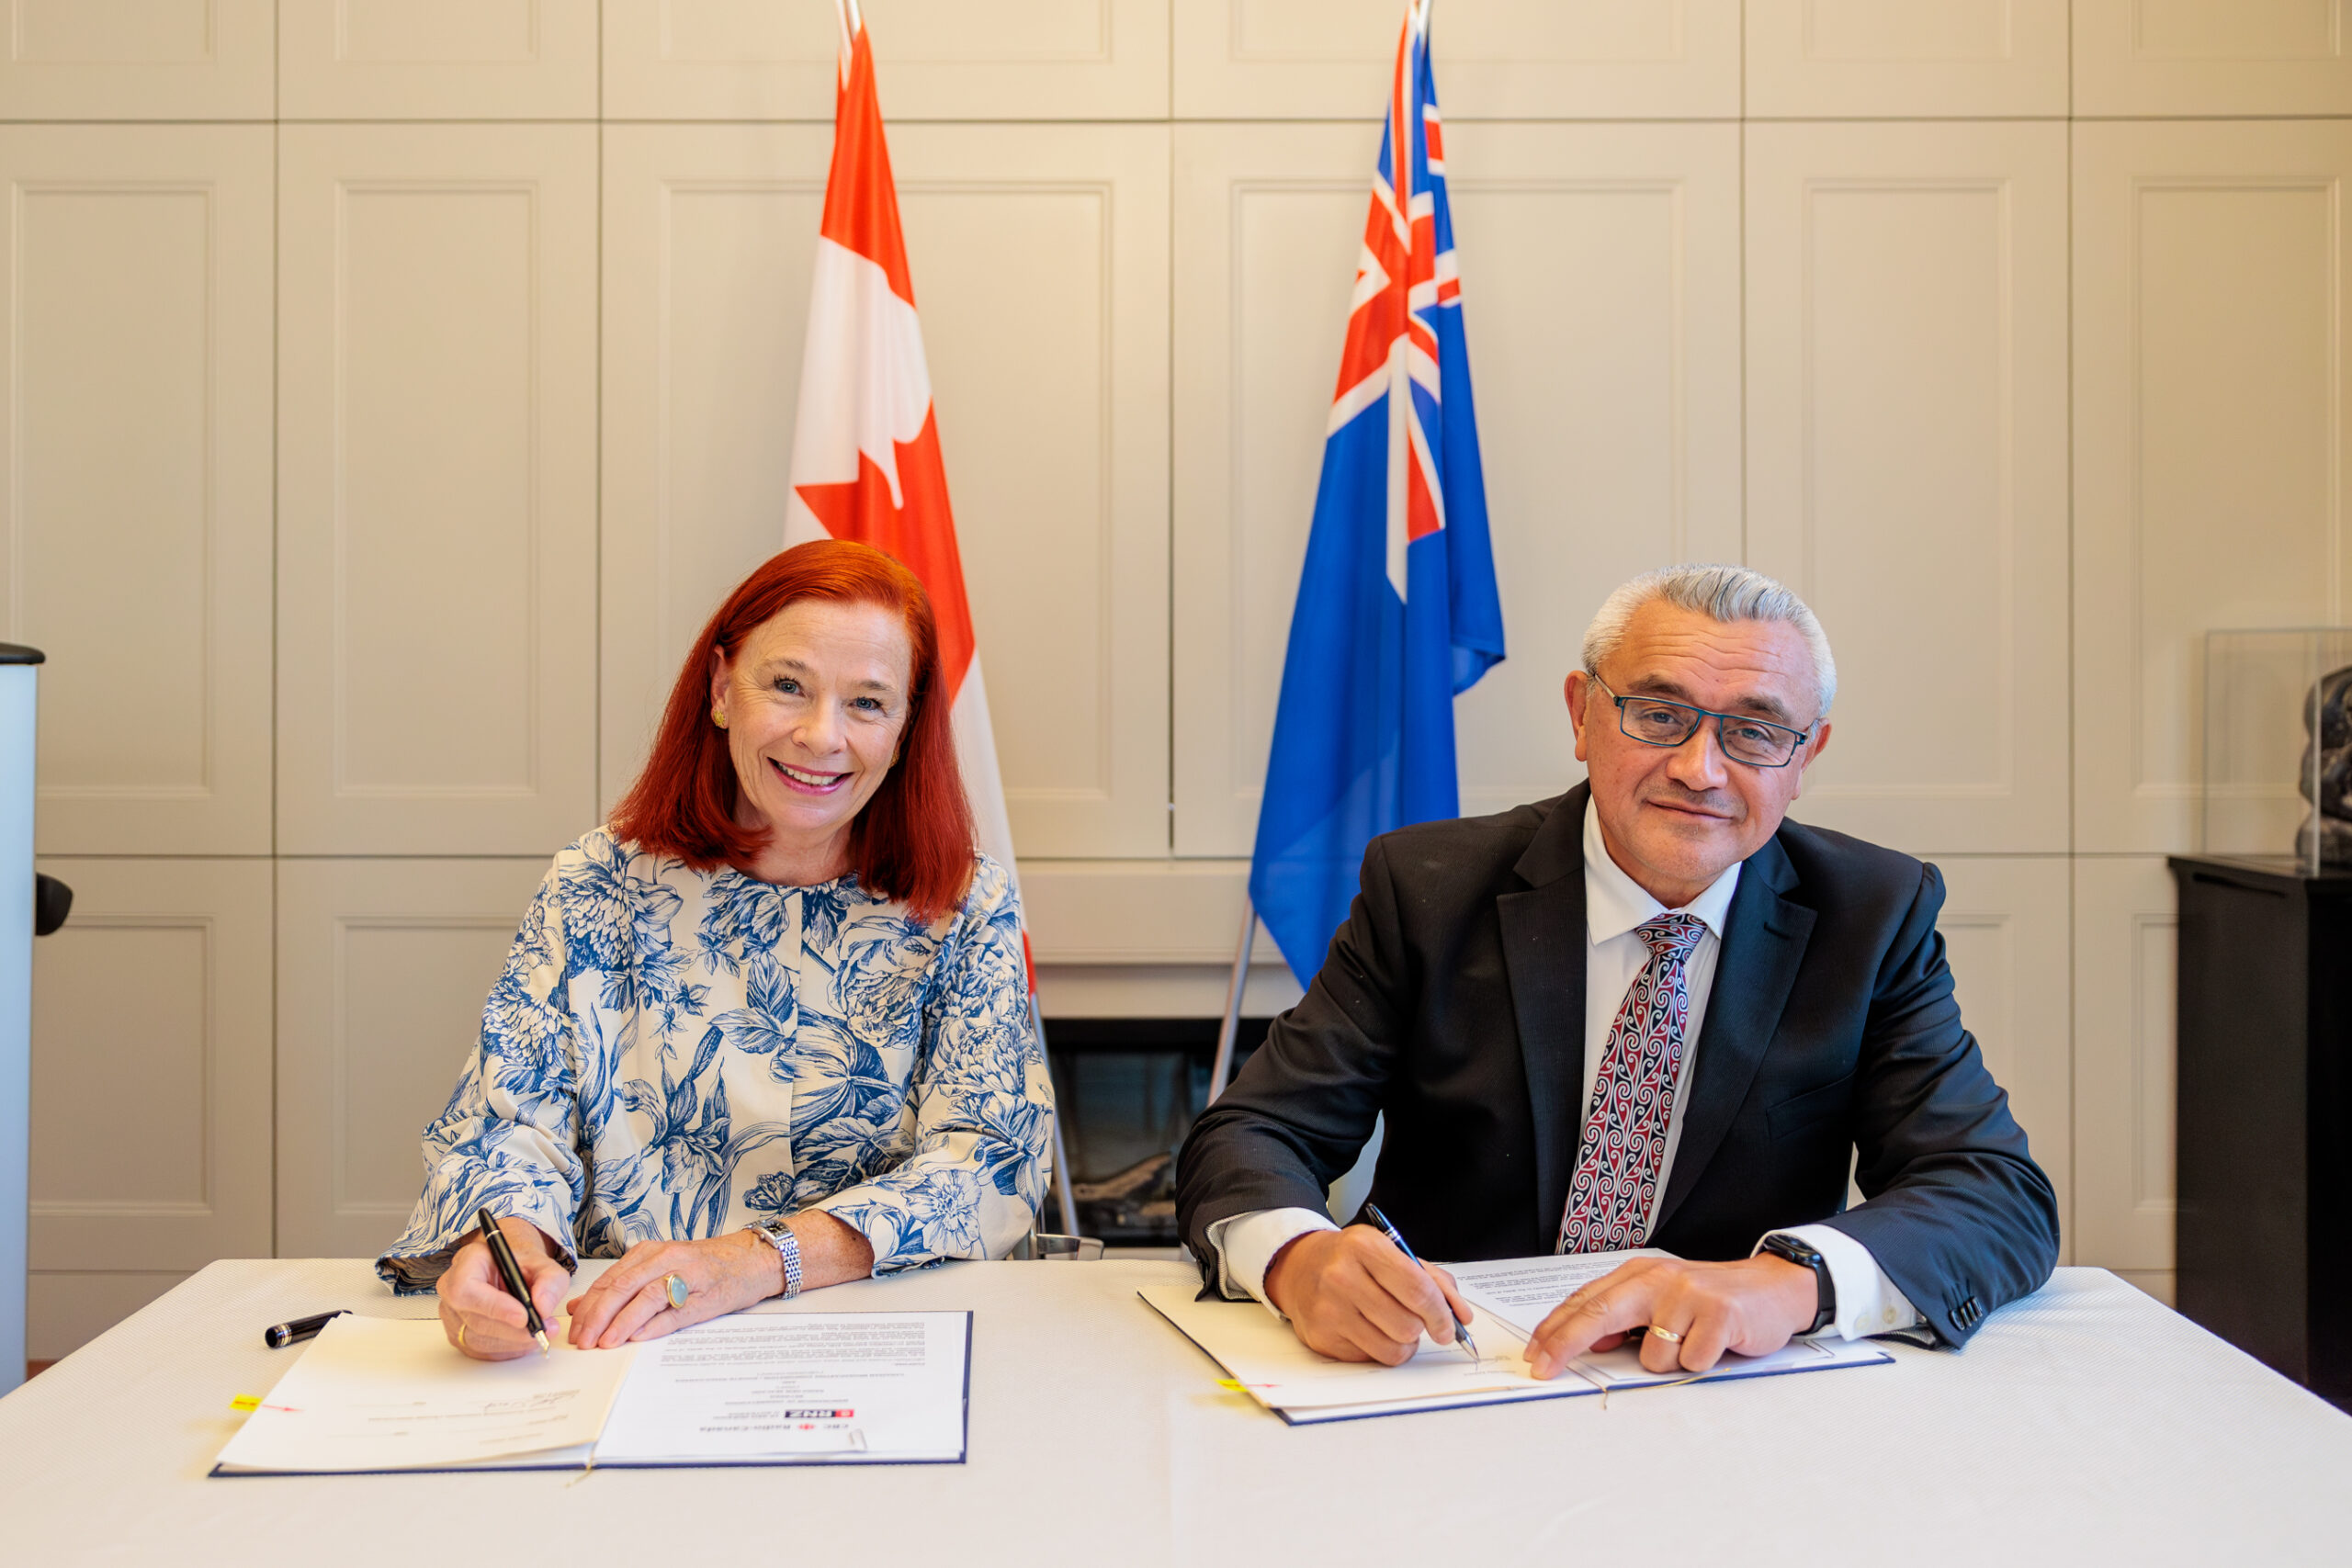 Catherine Tait and Jim Mather sat at a desk signing the MoU